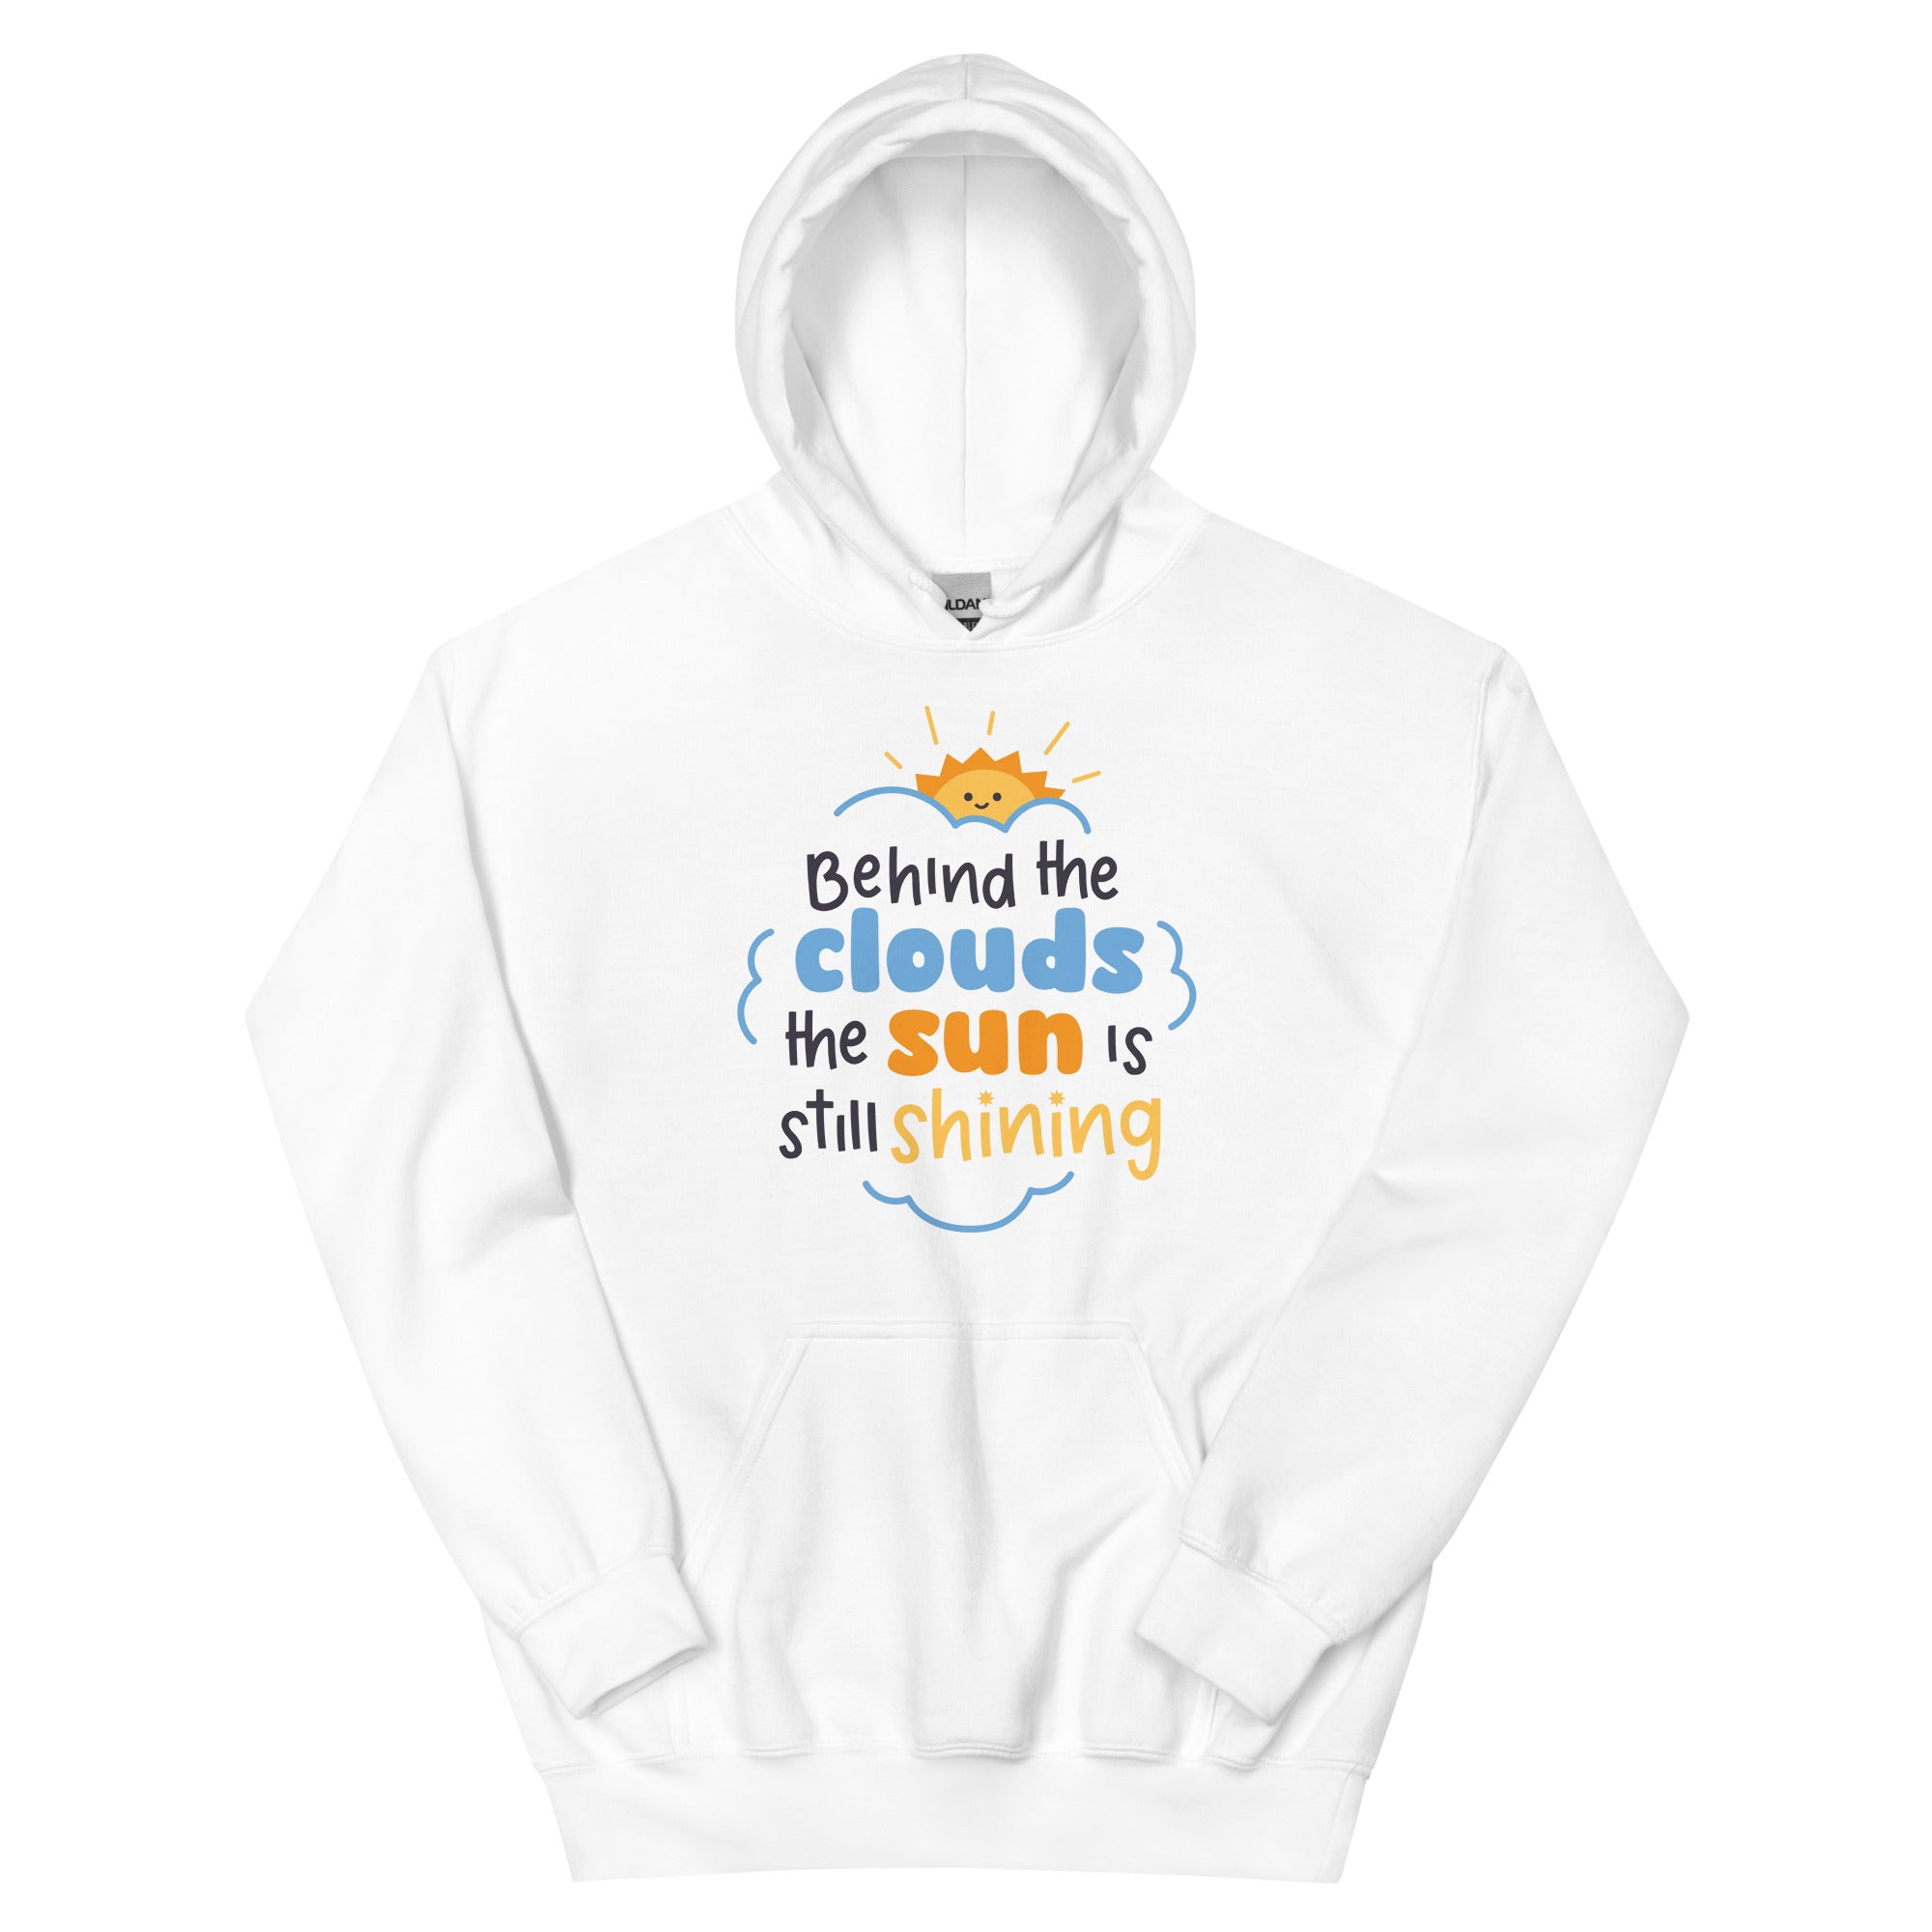 Behind The Clouds The Sun Is Still Shining - Unisex Hoodie